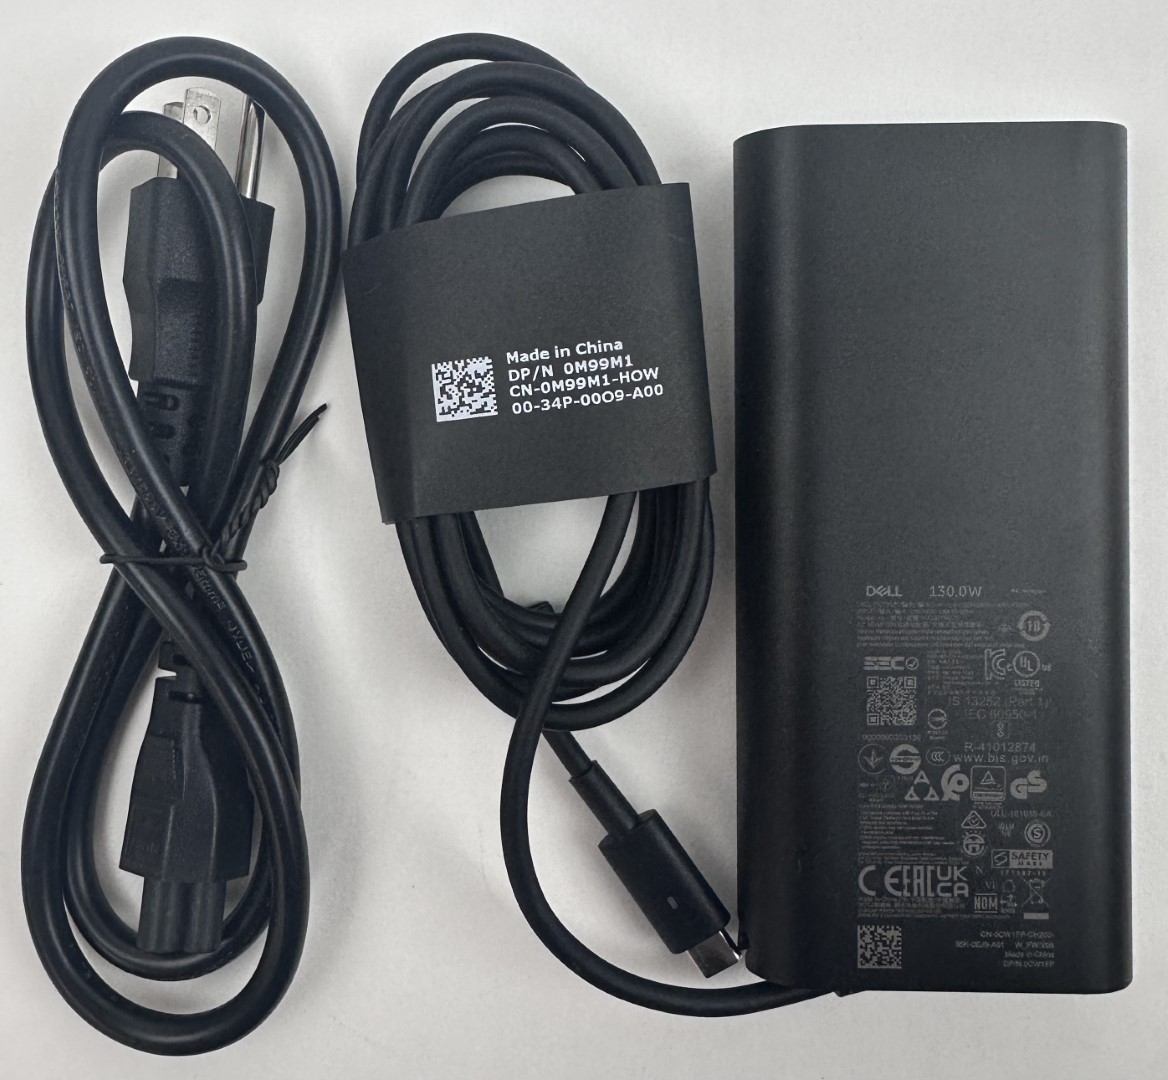 OEM Dell Power Supply Charger Adapter HA130PM170 130W USB-C Type-C Plug 0CW1FP